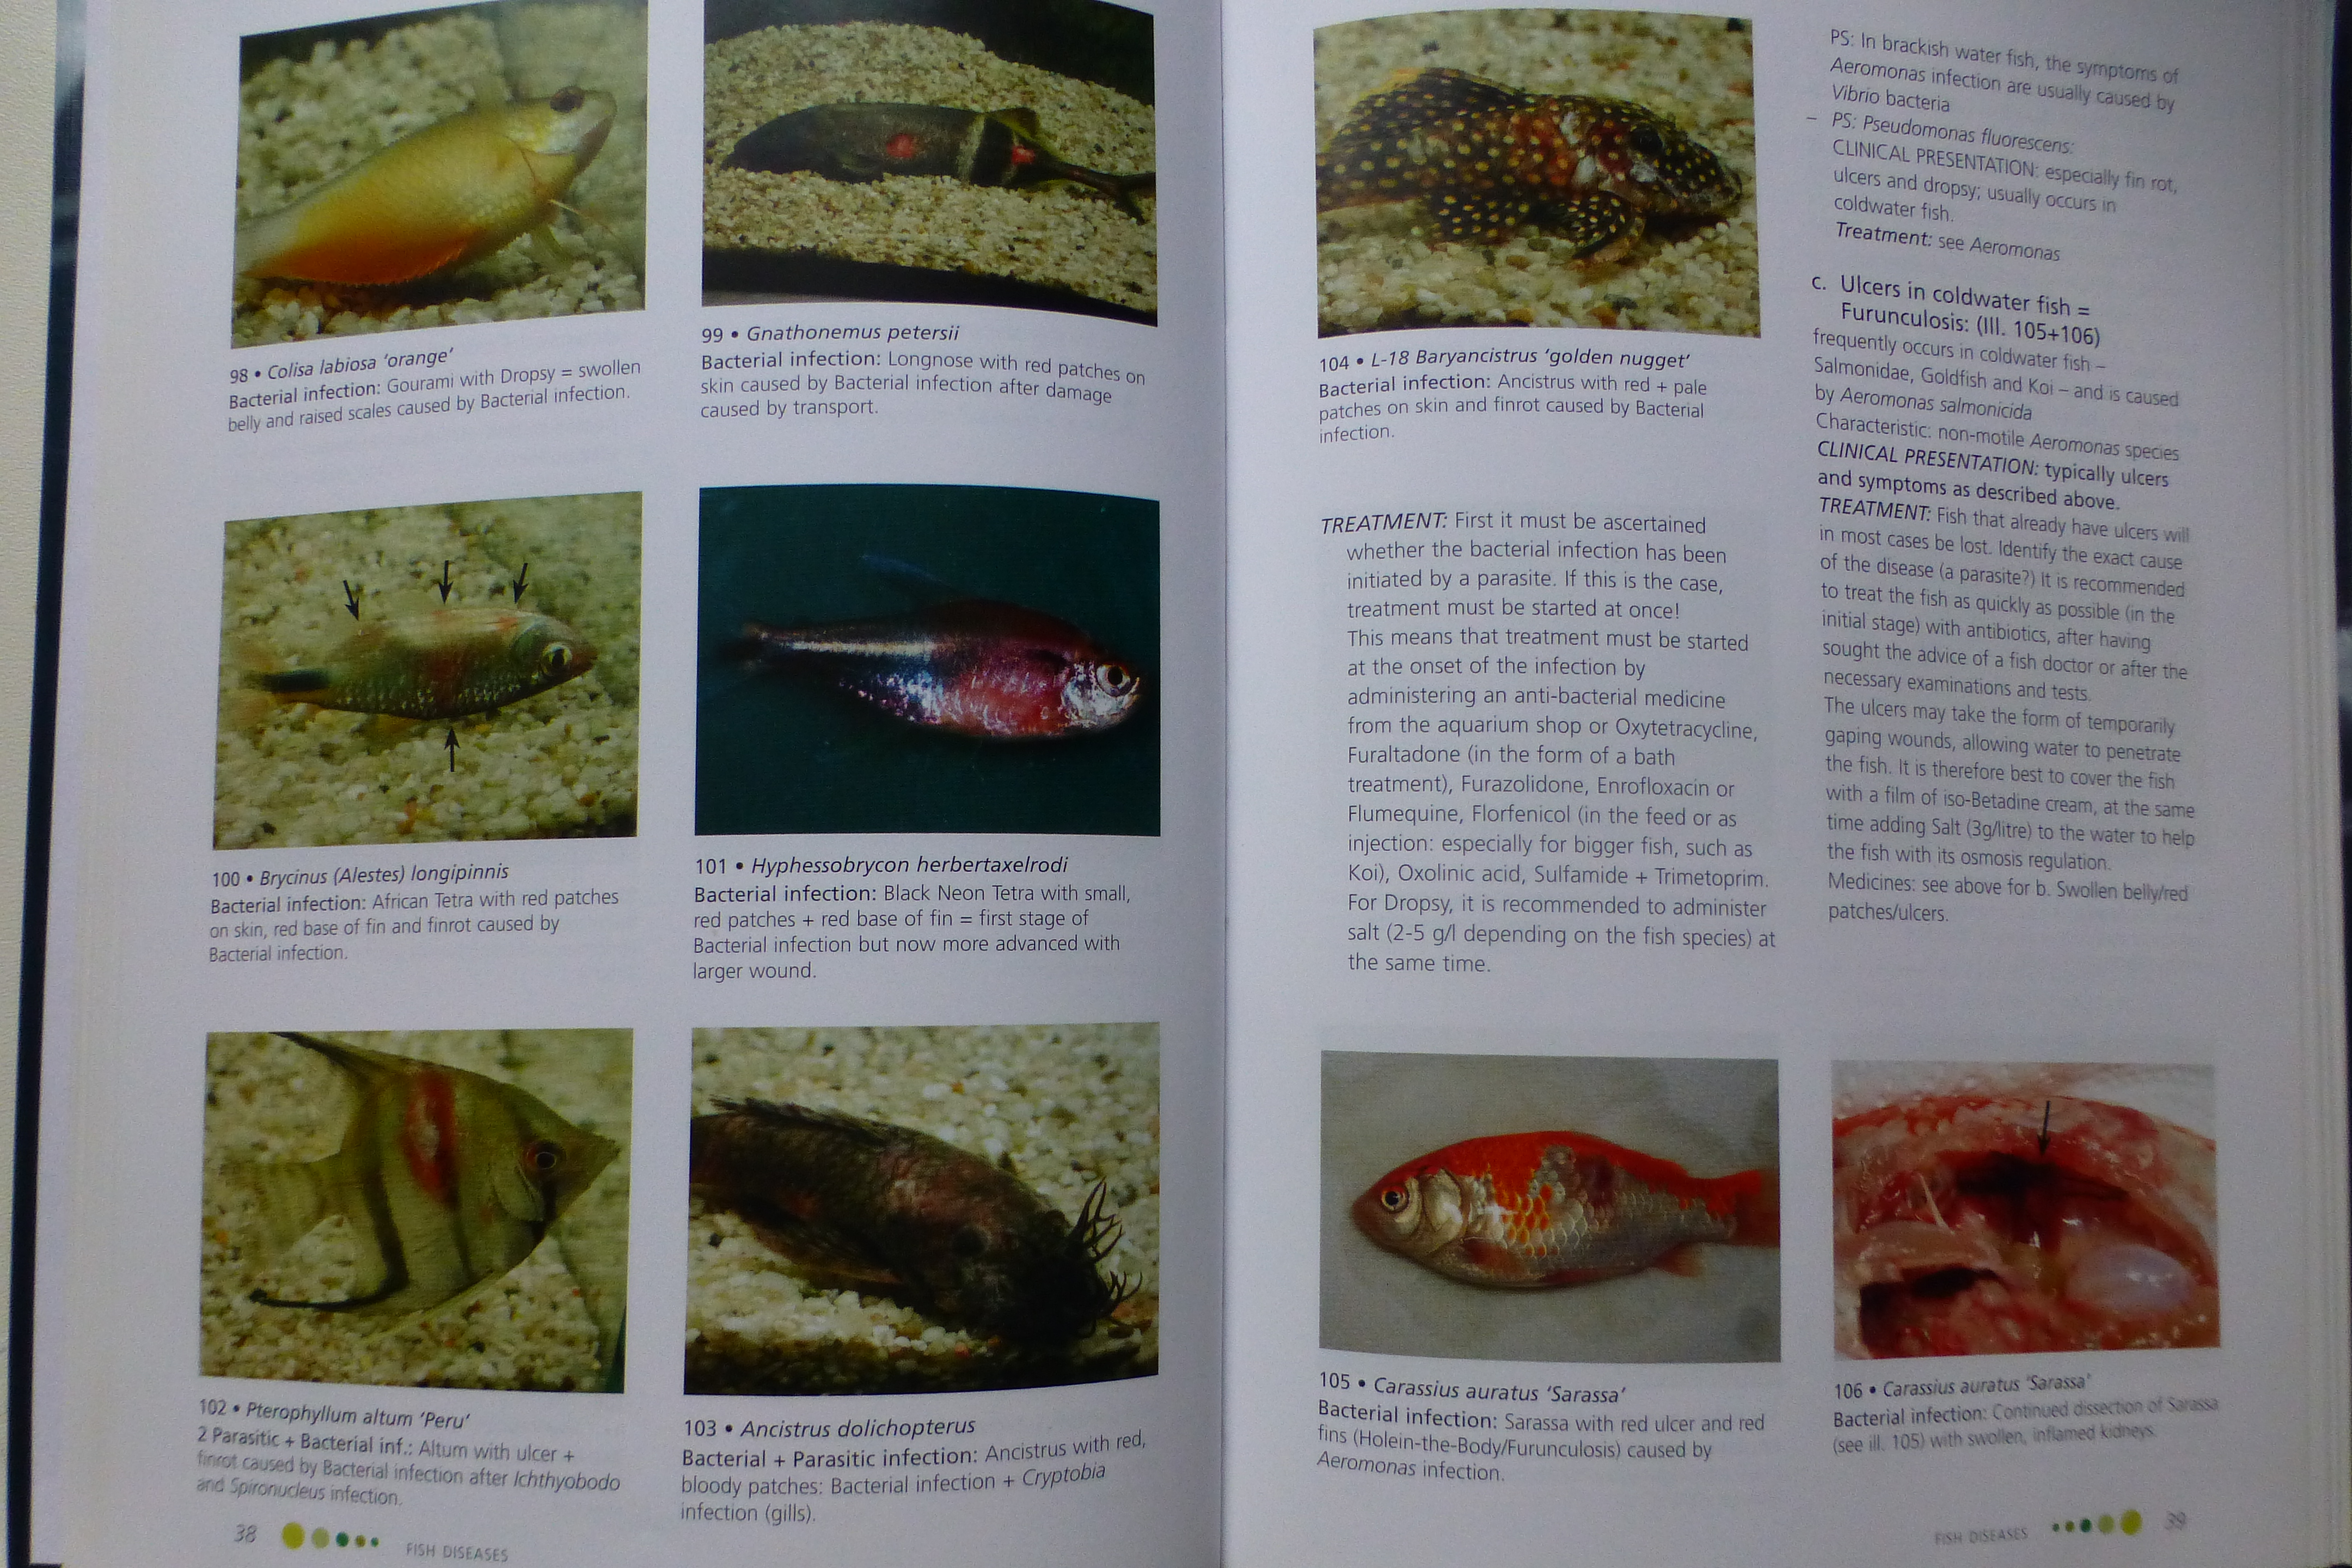 English book The practical guide to fish diseases opened on page 38